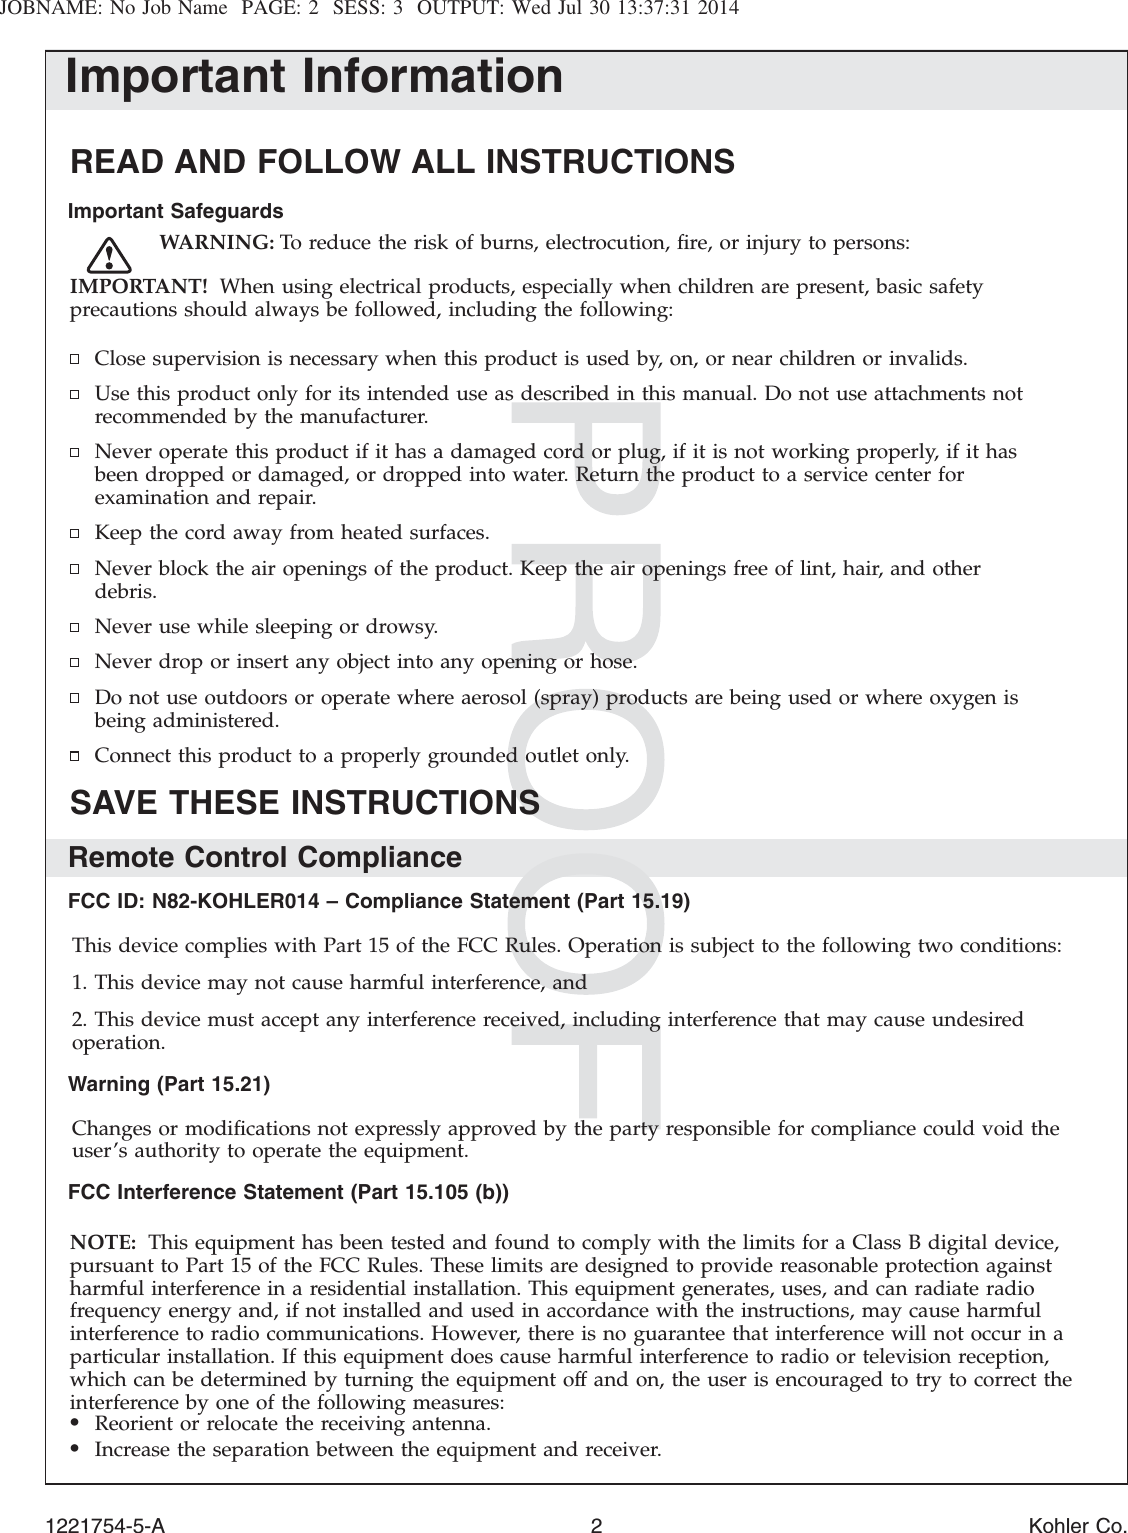 JOBNAME: No Job Name PAGE: 2 SESS: 3 OUTPUT: Wed Jul 30 13:37:31 2014Important InformationREAD AND FOLLOW ALL INSTRUCTIONSImportant SafeguardsWARNING: To reduce the risk of burns, electrocution, ﬁre, or injury to persons:IMPORTANT! When using electrical products, especially when children are present, basic safetyprecautions should always be followed, including the following:Close supervision is necessary when this product is used by, on, or near children or invalids.Use this product only for its intended use as described in this manual. Do not use attachments notrecommended by the manufacturer.Never operate this product if it has a damaged cord or plug, if it is not working properly, if it hasbeen dropped or damaged, or dropped into water. Return the product to a service center forexamination and repair.Keep the cord away from heated surfaces.Never block the air openings of the product. Keep the air openings free of lint, hair, and otherdebris.Never use while sleeping or drowsy.Never drop or insert any object into any opening or hose.Do not use outdoors or operate where aerosol (spray) products are being used or where oxygen isbeing administered.Connect this product to a properly grounded outlet only.SAVE THESE INSTRUCTIONSRemote Control ComplianceFCC ID: N82-KOHLER014 – Compliance Statement (Part 15.19)This device complies with Part 15 of the FCC Rules. Operation is subject to the following two conditions:1. This device may not cause harmful interference, and2. This device must accept any interference received, including interference that may cause undesiredoperation.Warning (Part 15.21)Changes or modiﬁcations not expressly approved by the party responsible for compliance could void theuser’s authority to operate the equipment.FCC Interference Statement (Part 15.105 (b))NOTE: This equipment has been tested and found to comply with the limits for a Class B digital device,pursuant to Part 15 of the FCC Rules. These limits are designed to provide reasonable protection againstharmful interference in a residential installation. This equipment generates, uses, and can radiate radiofrequency energy and, if not installed and used in accordance with the instructions, may cause harmfulinterference to radio communications. However, there is no guarantee that interference will not occur in aparticular installation. If this equipment does cause harmful interference to radio or television reception,which can be determined by turning the equipment off and on, the user is encouraged to try to correct theinterference by one of the following measures:•Reorient or relocate the receiving antenna.•Increase the separation between the equipment and receiver.1221754-5-A 2 Kohler Co.